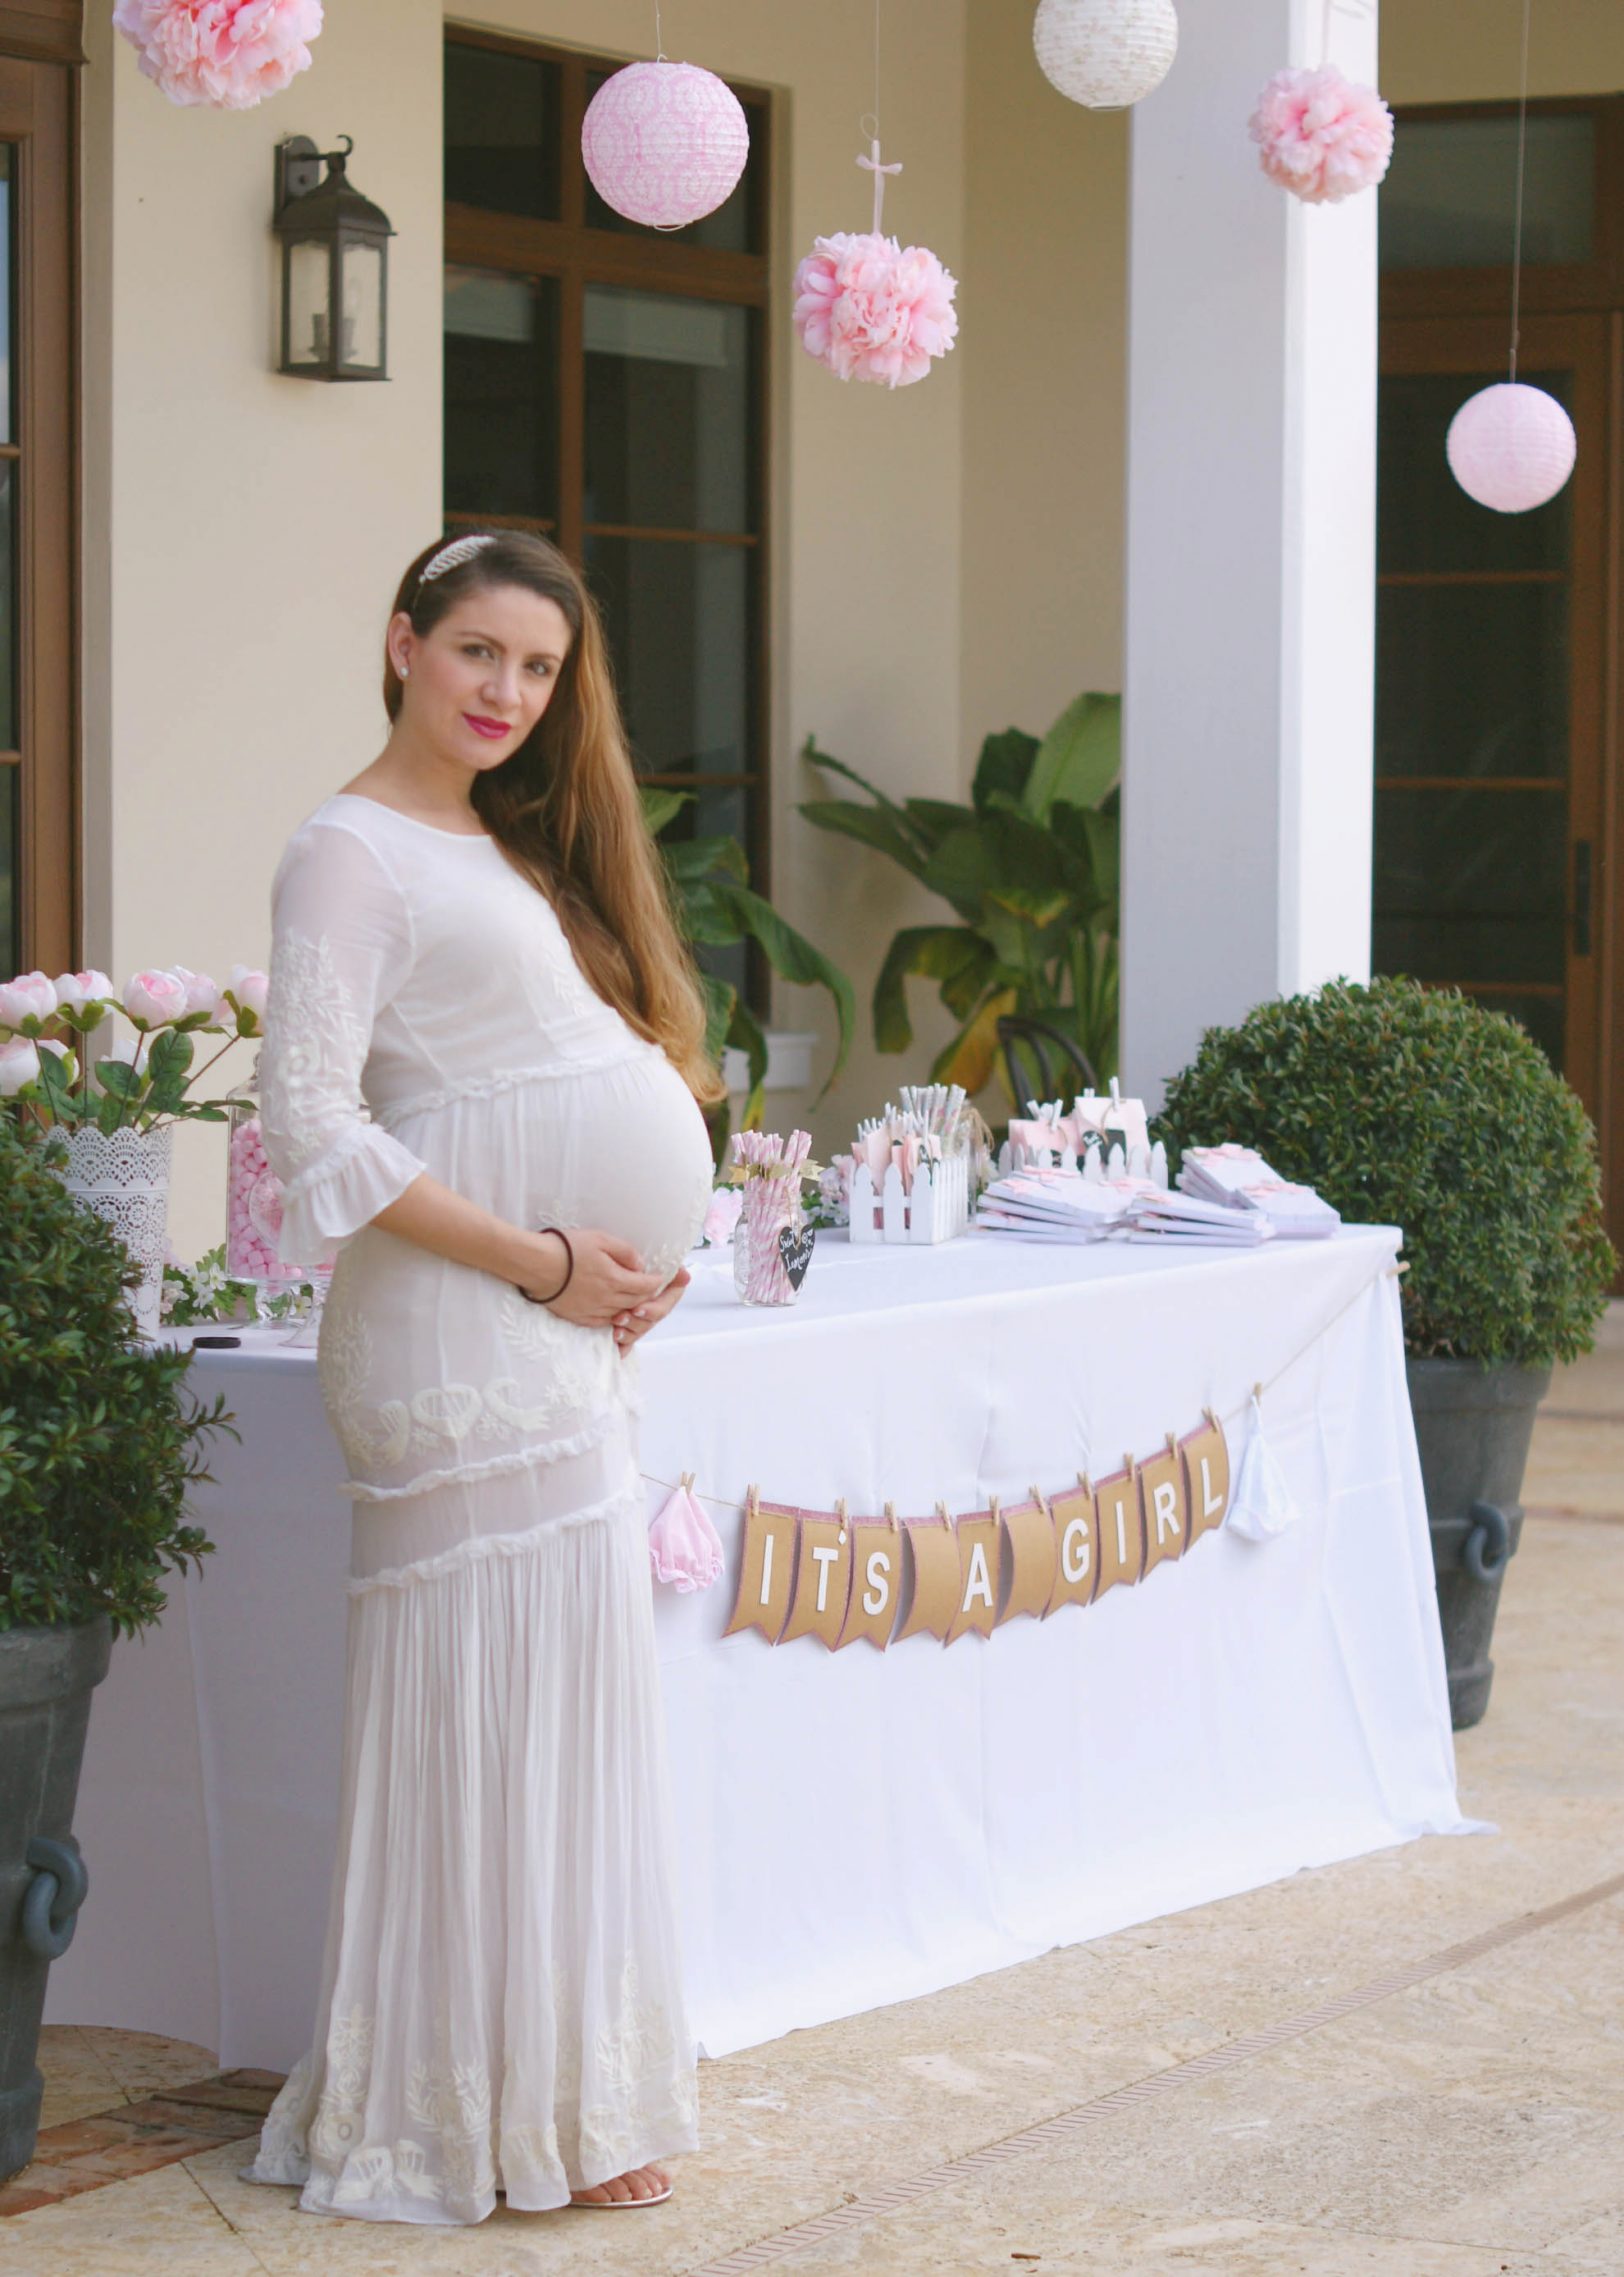 Full Size of Baby Shower:pink Maternity Dress Maternity Gowns For Photography Maternity Dresses For Baby Shower Mom And Dad Baby Shower Outfits Maternity Blouses For Baby Shower Plus Size Maternity Dresses For Baby Shower What Should I Wear To My Baby Shower Plus Size Maternity Clothes